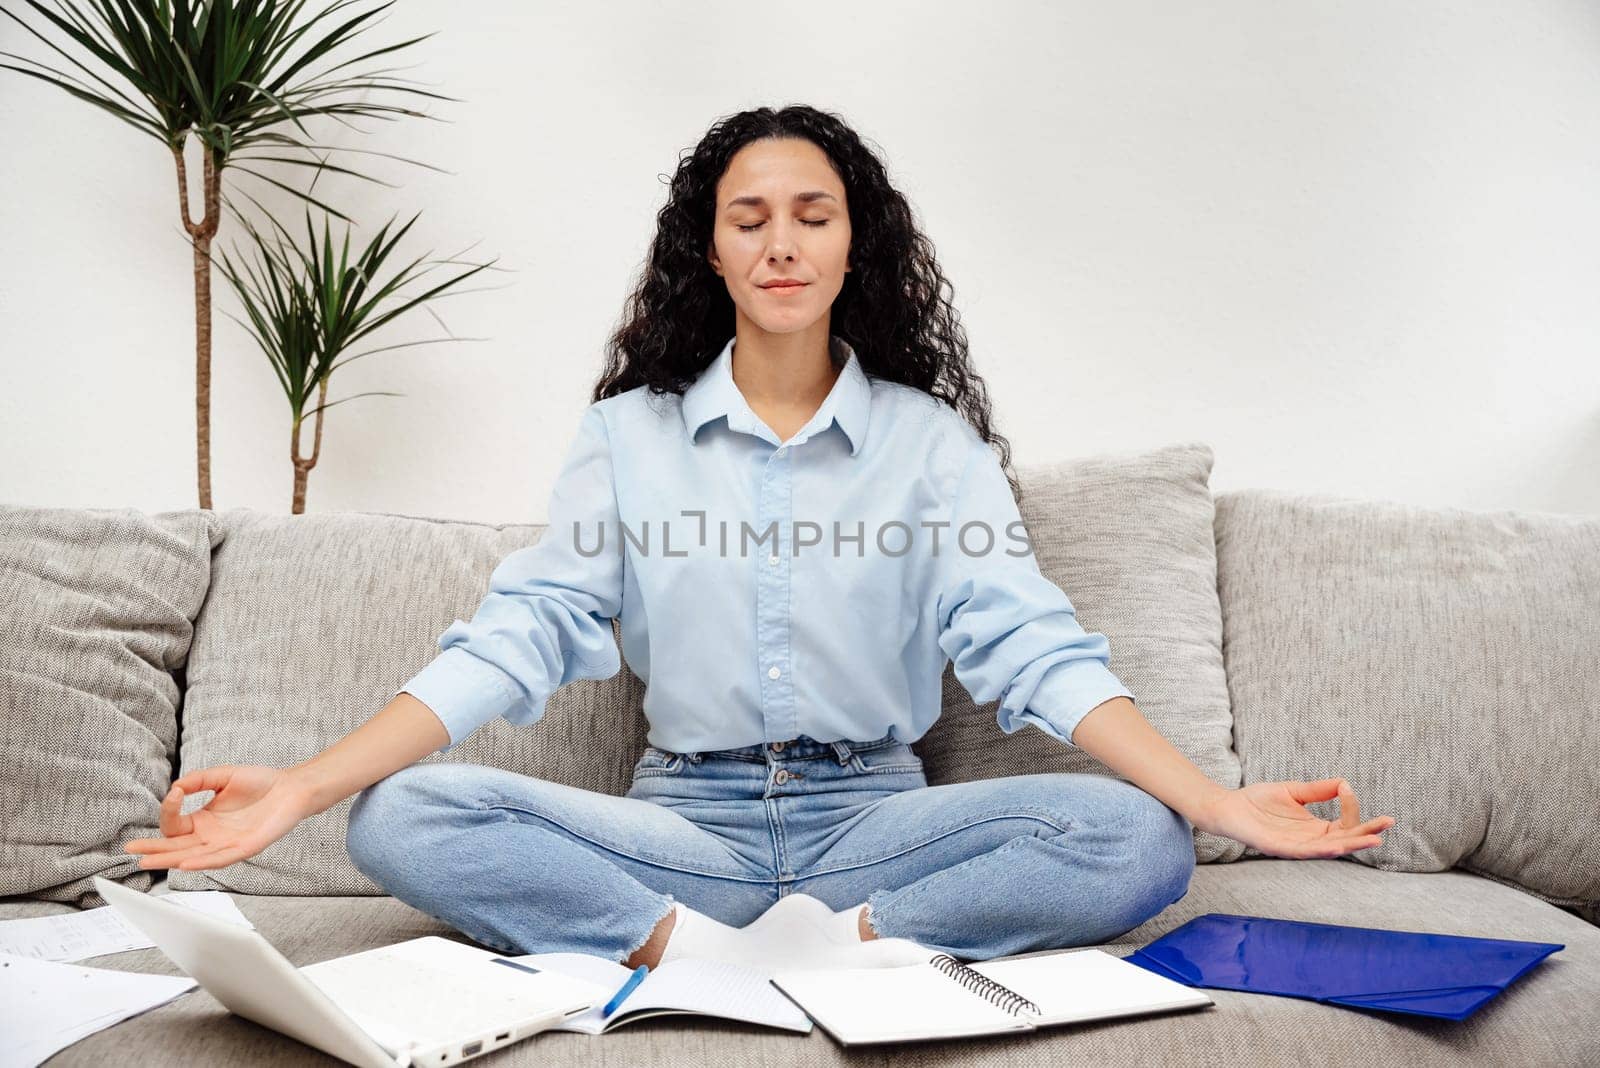 Beautiful young woman mixed race close your eyes and rest during work break. Nice relaxation sitting on sofa in yoga pose